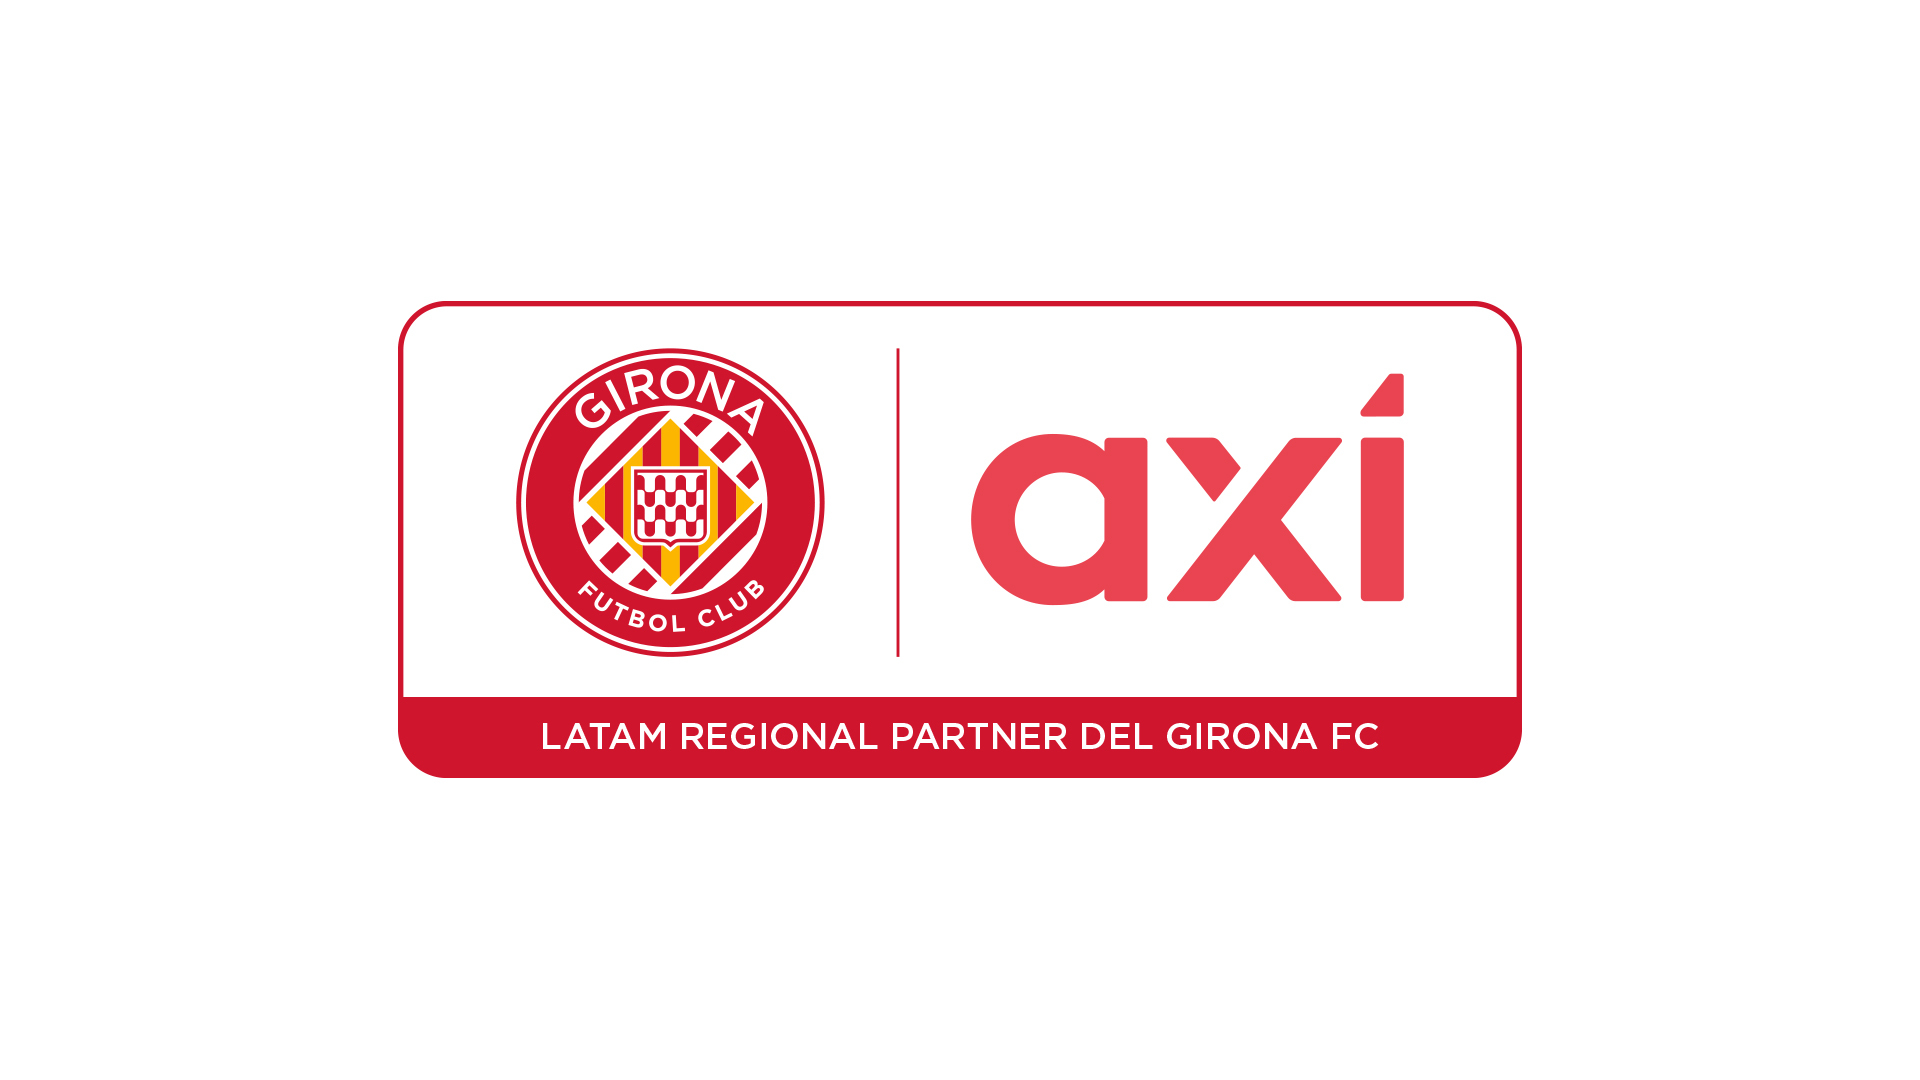 Axi Expands Partnership Portfolio, Joins Forces with LaLiga Club, Girona FC  / Axi